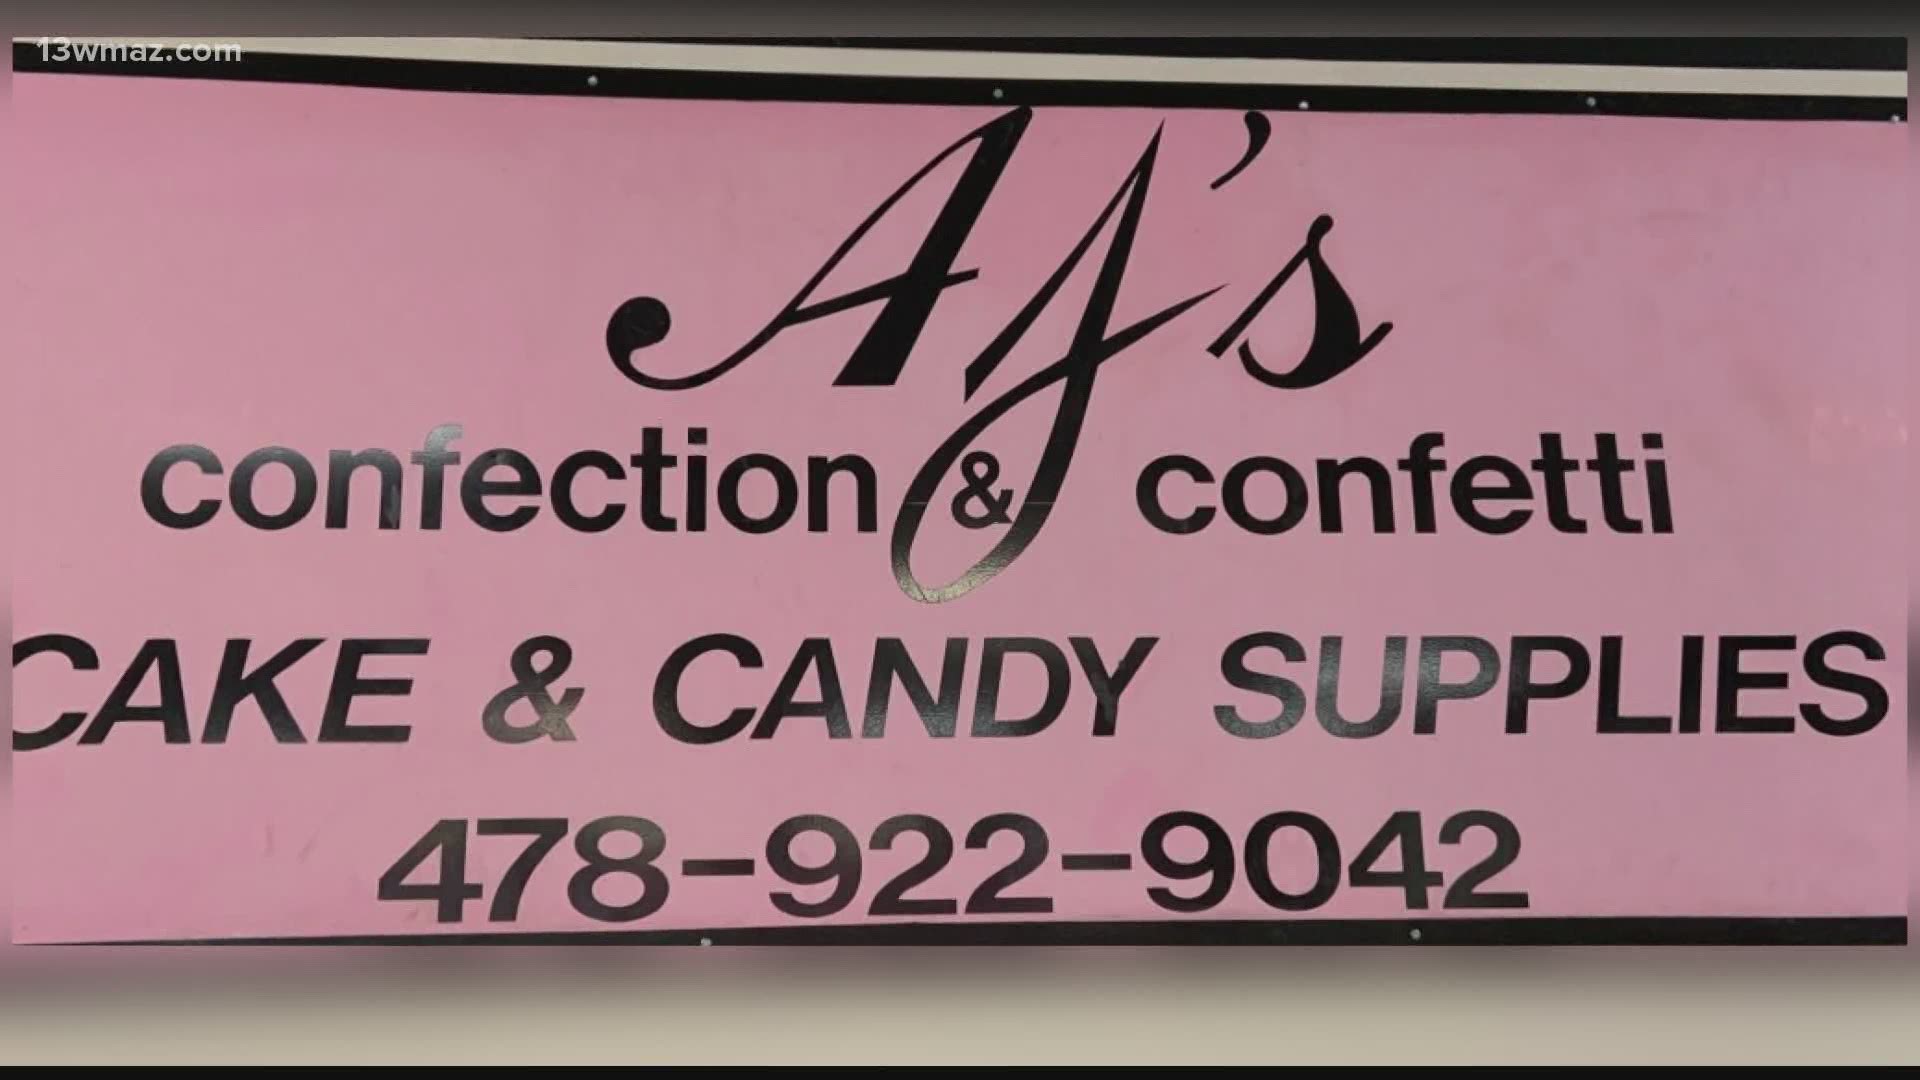 AJ's Confection and Confetti is hurting, but thanks to some help from the community, they say they think they'll be alright.